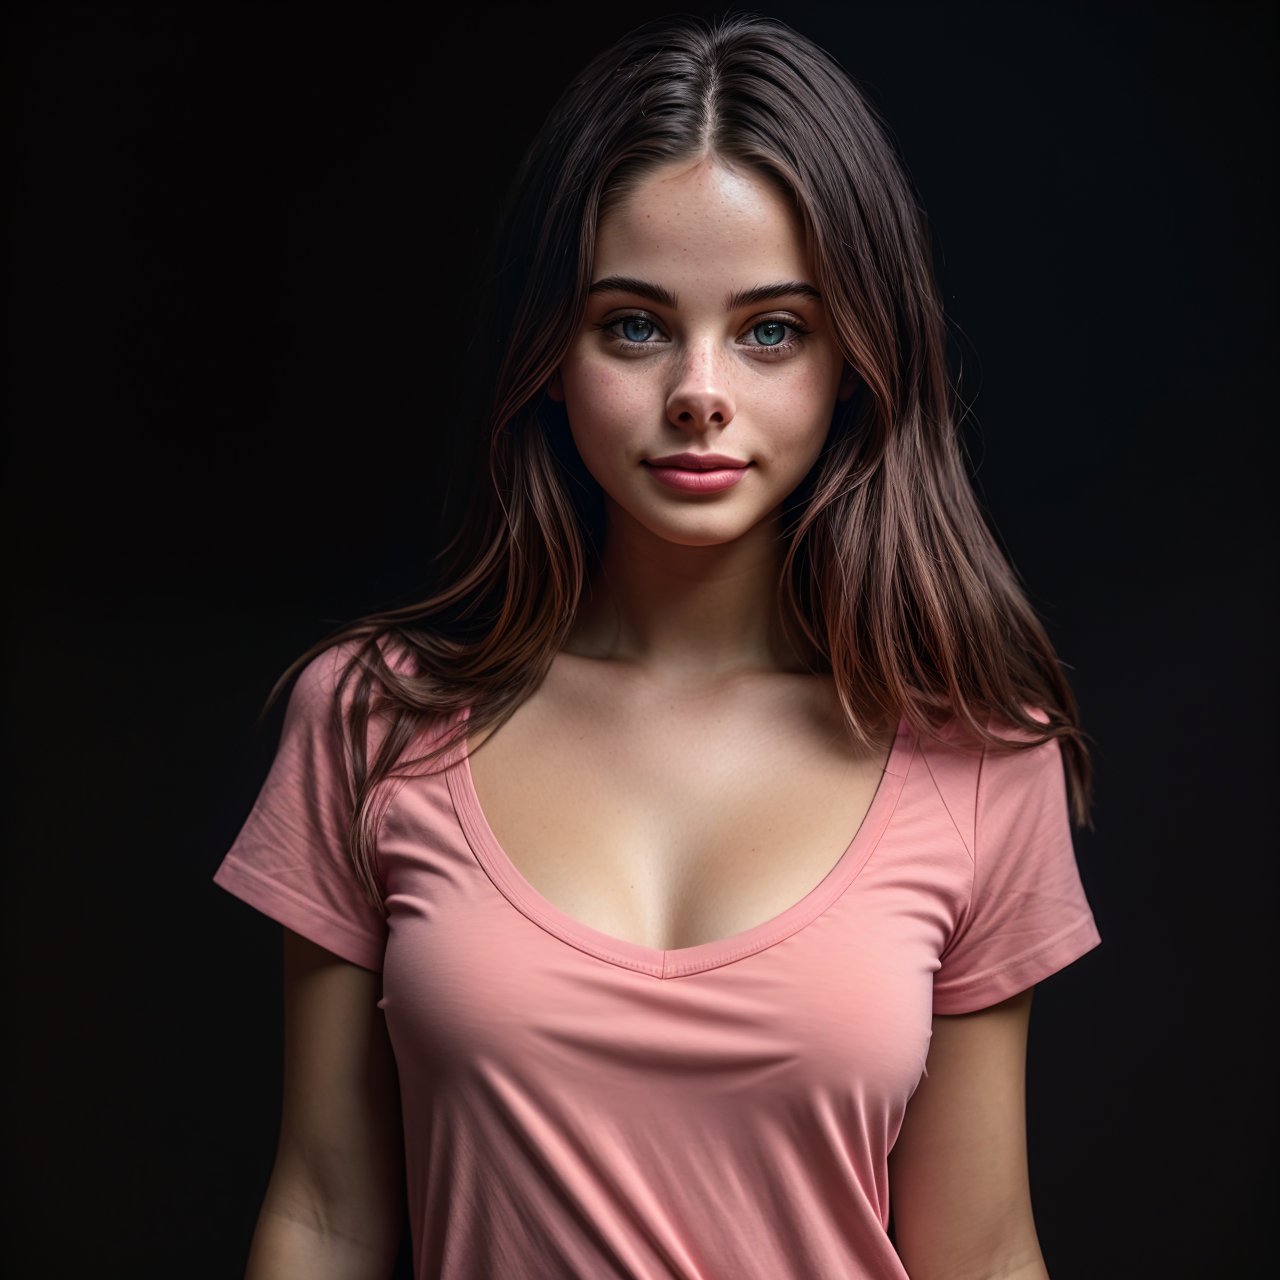 wallpaper view from above, full body portrait of smiling (AIDA_LoRA_MeW2023:1.08) <lora:AIDA_LoRA_MeW2023:0.87> in (simple pink t-shirt:1.1), [stunning woman], pretty face, naughty, funny, happy, playful, intimate, flirting with camera, cinematic, insane level of details, intricate pattern, kkw-ph1, (colorful:1.1), (studio photo:1.1), (simple black background:1.1)